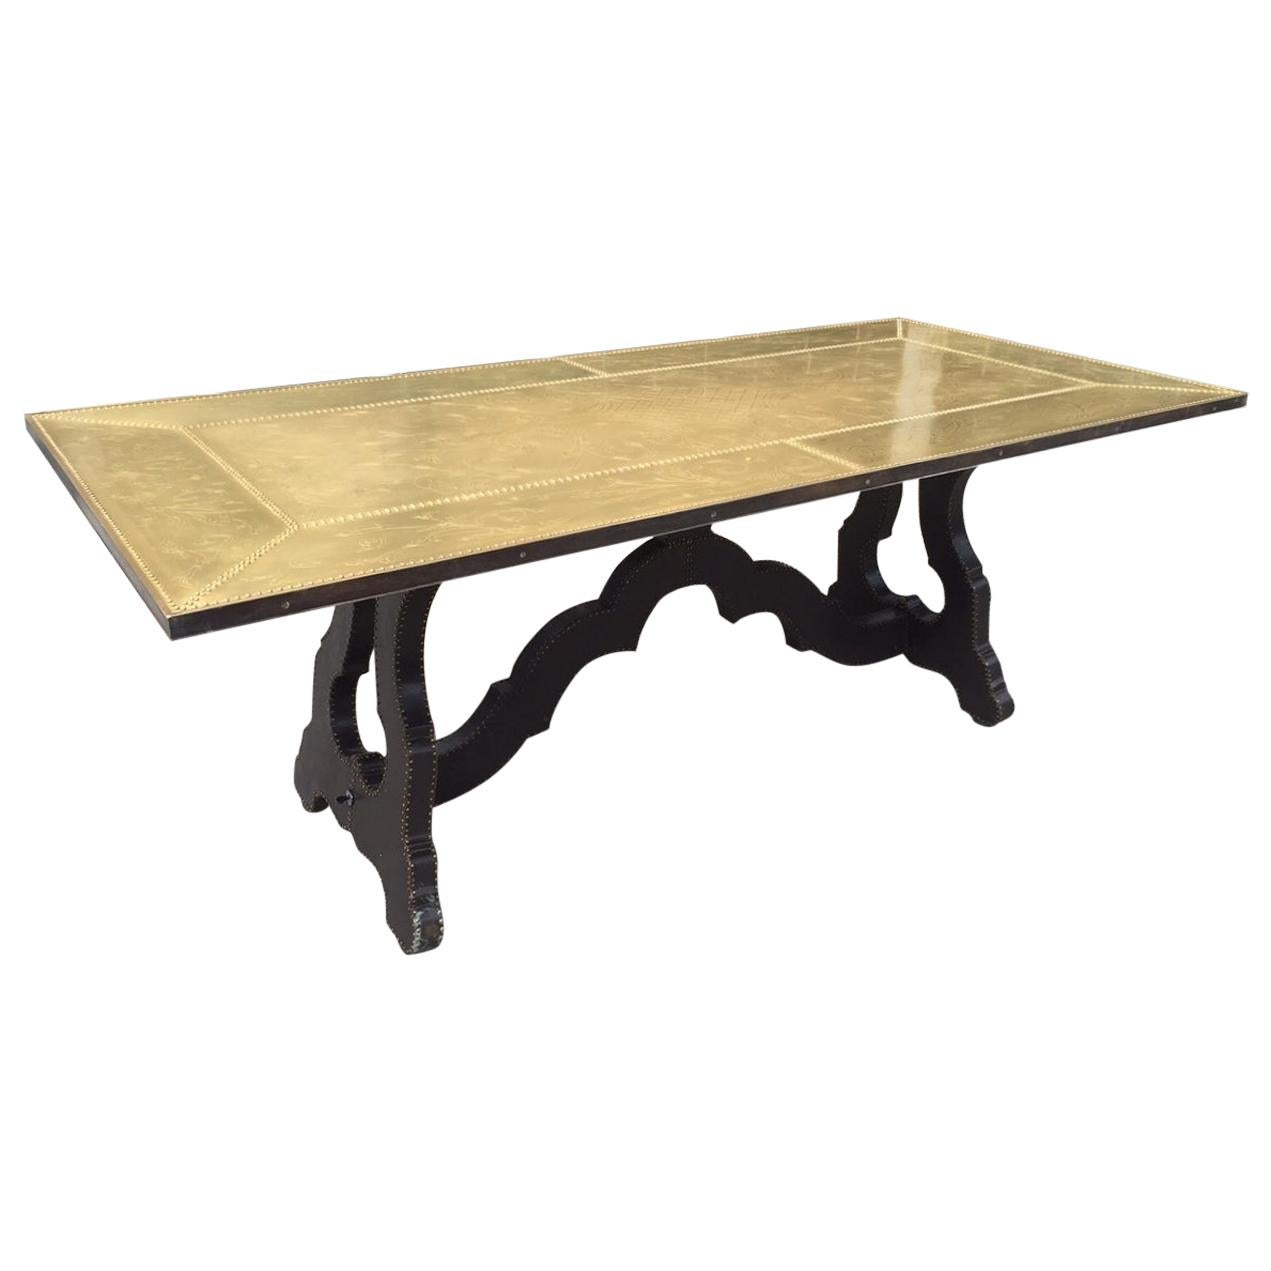 Spanish Bronze Etched Top Trestle Table